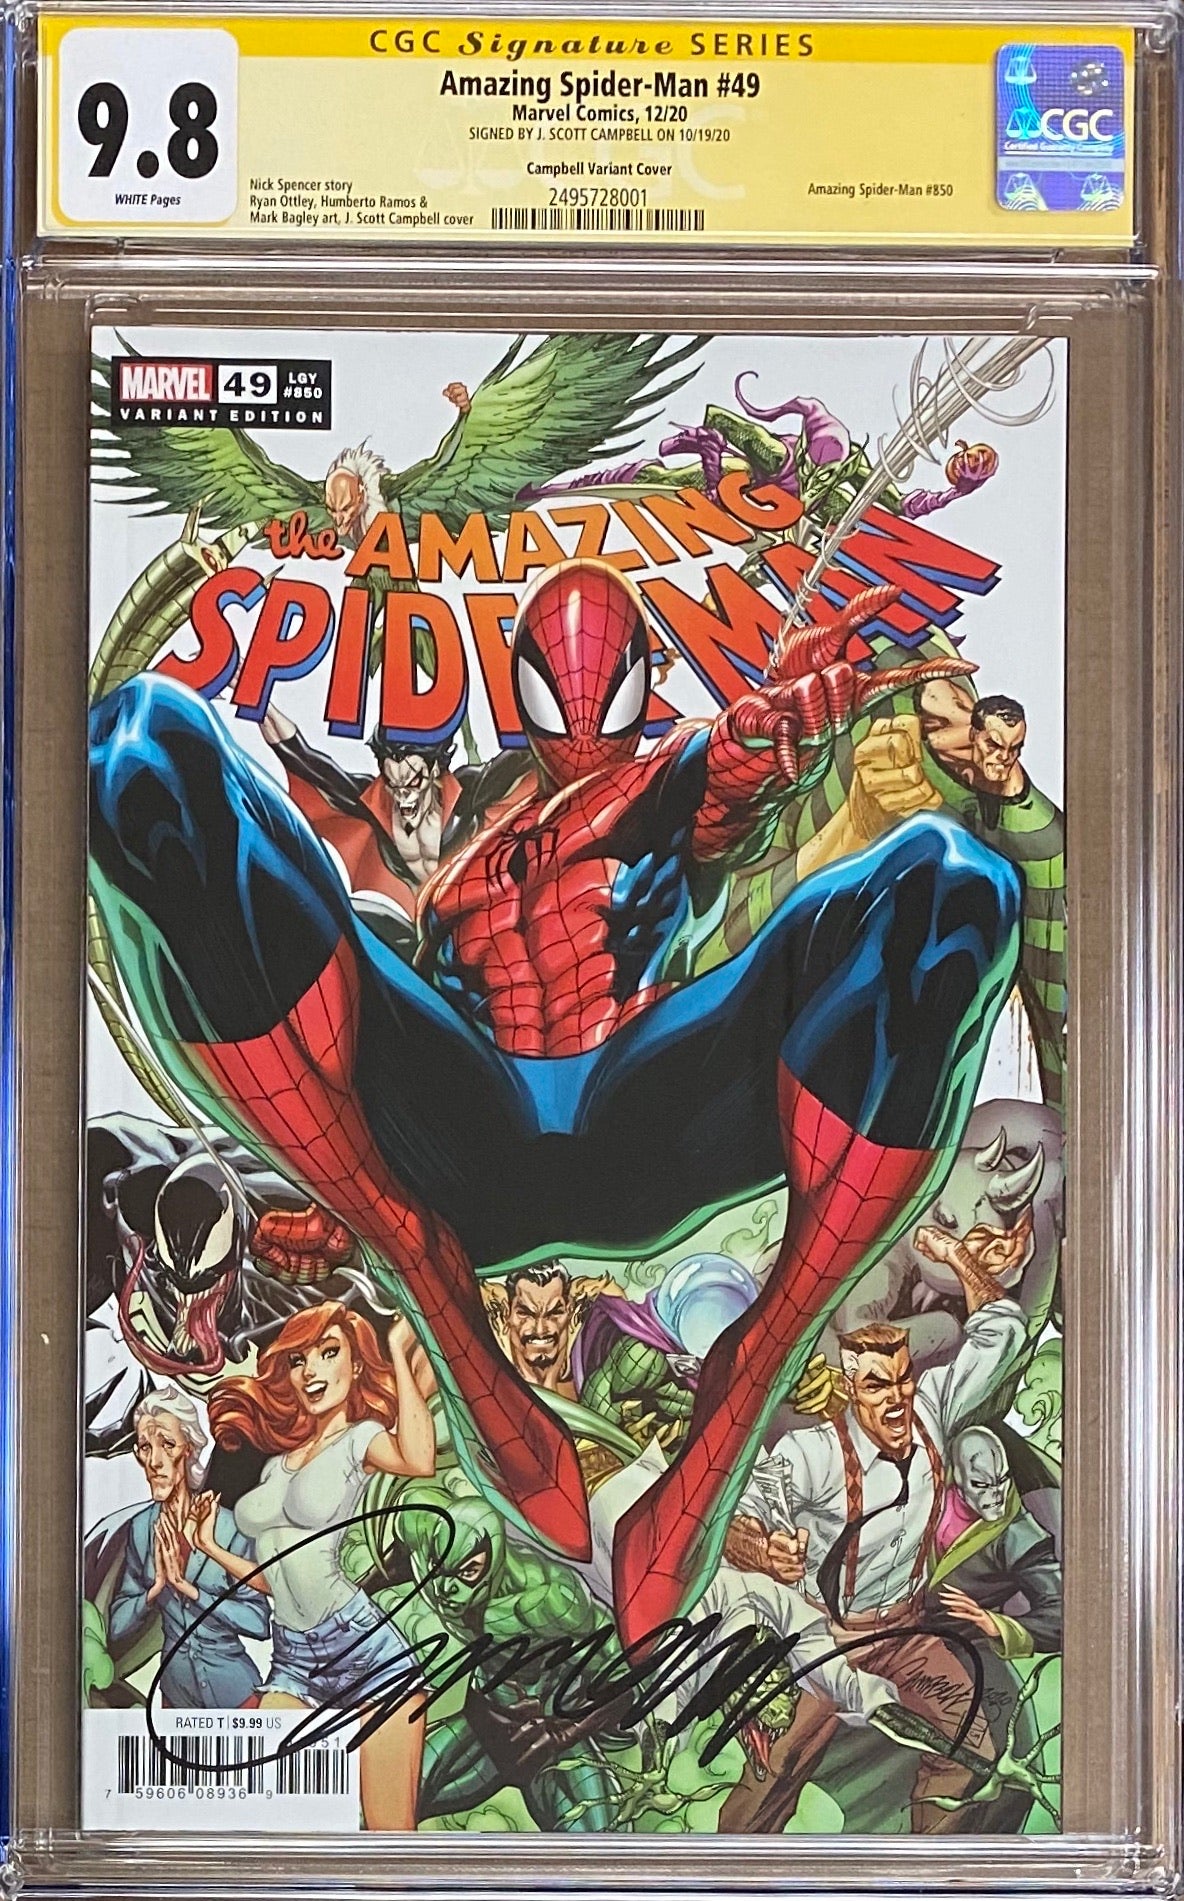 Amazing Spider-Man #850 (#49) Campbell Variant CGC 9.8 SS